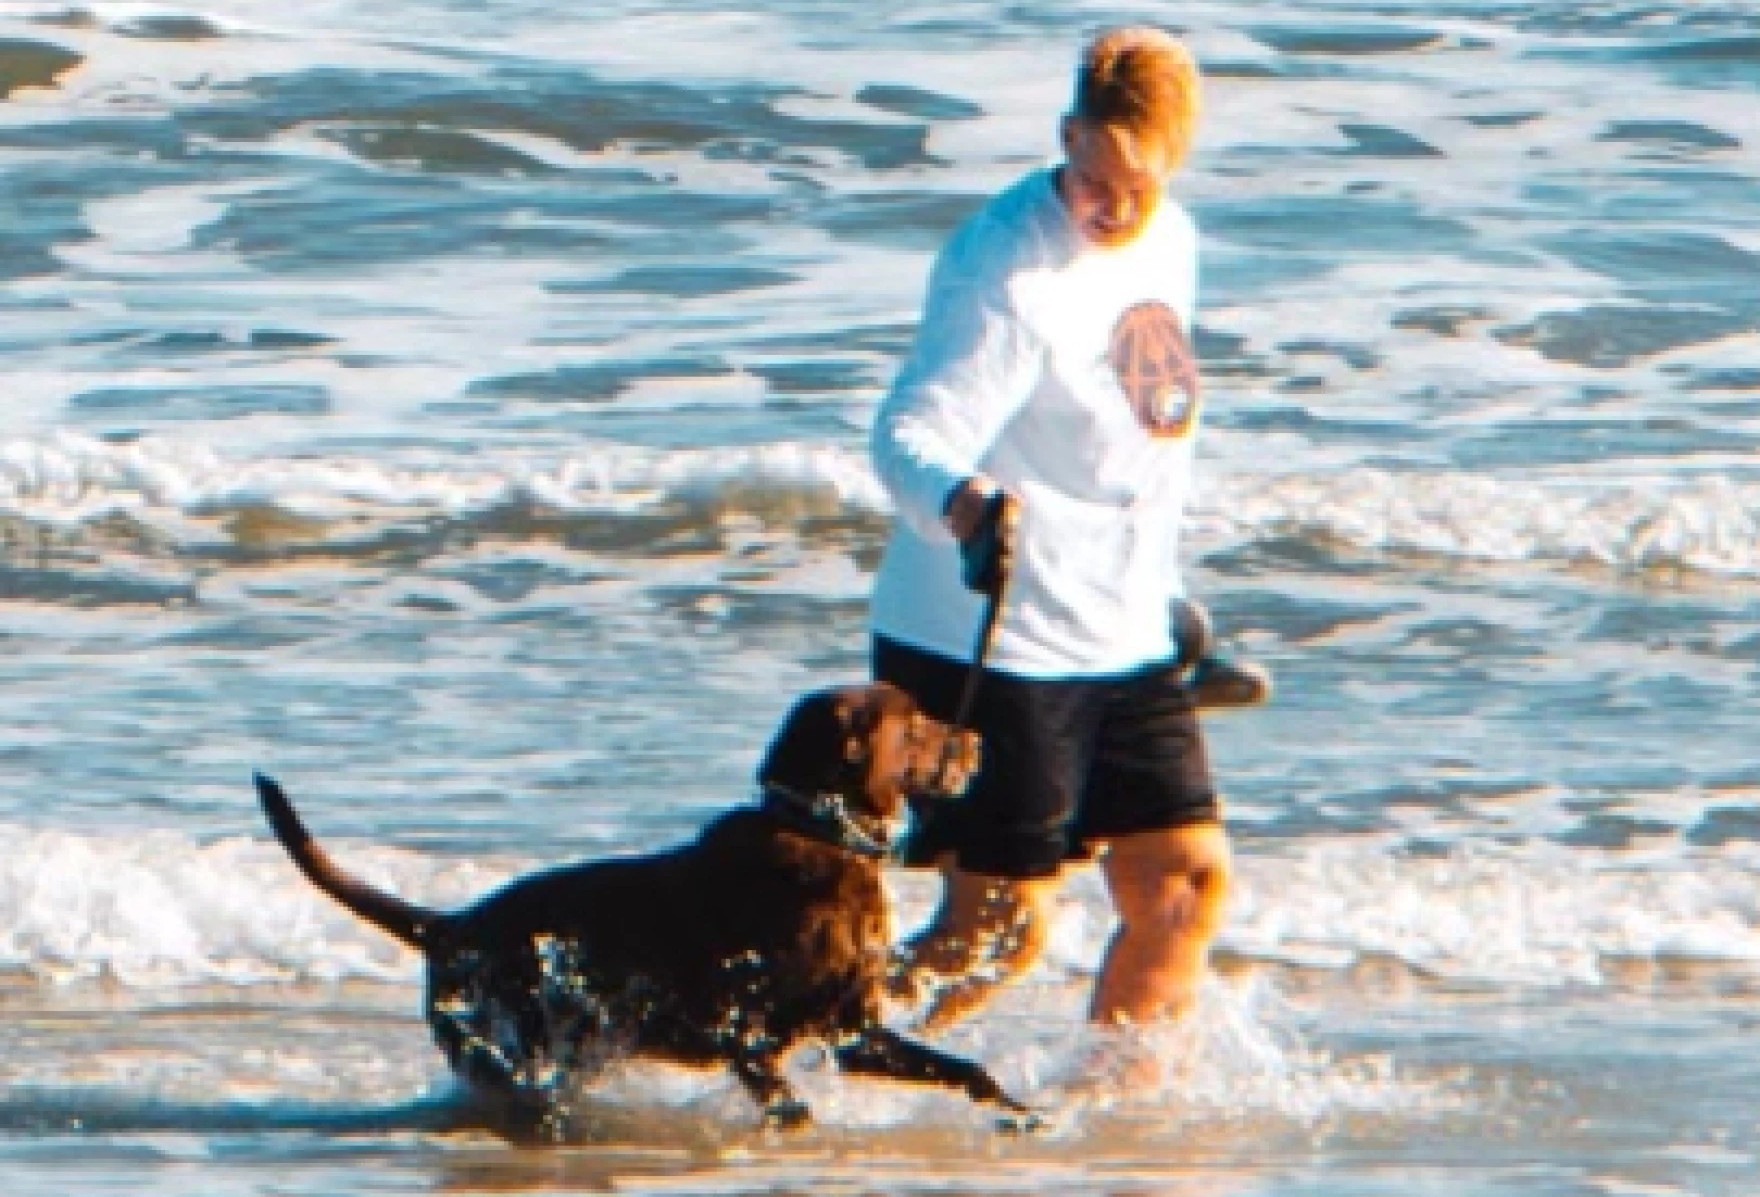 Photo of Mary Roach and Jaxon running on the beach